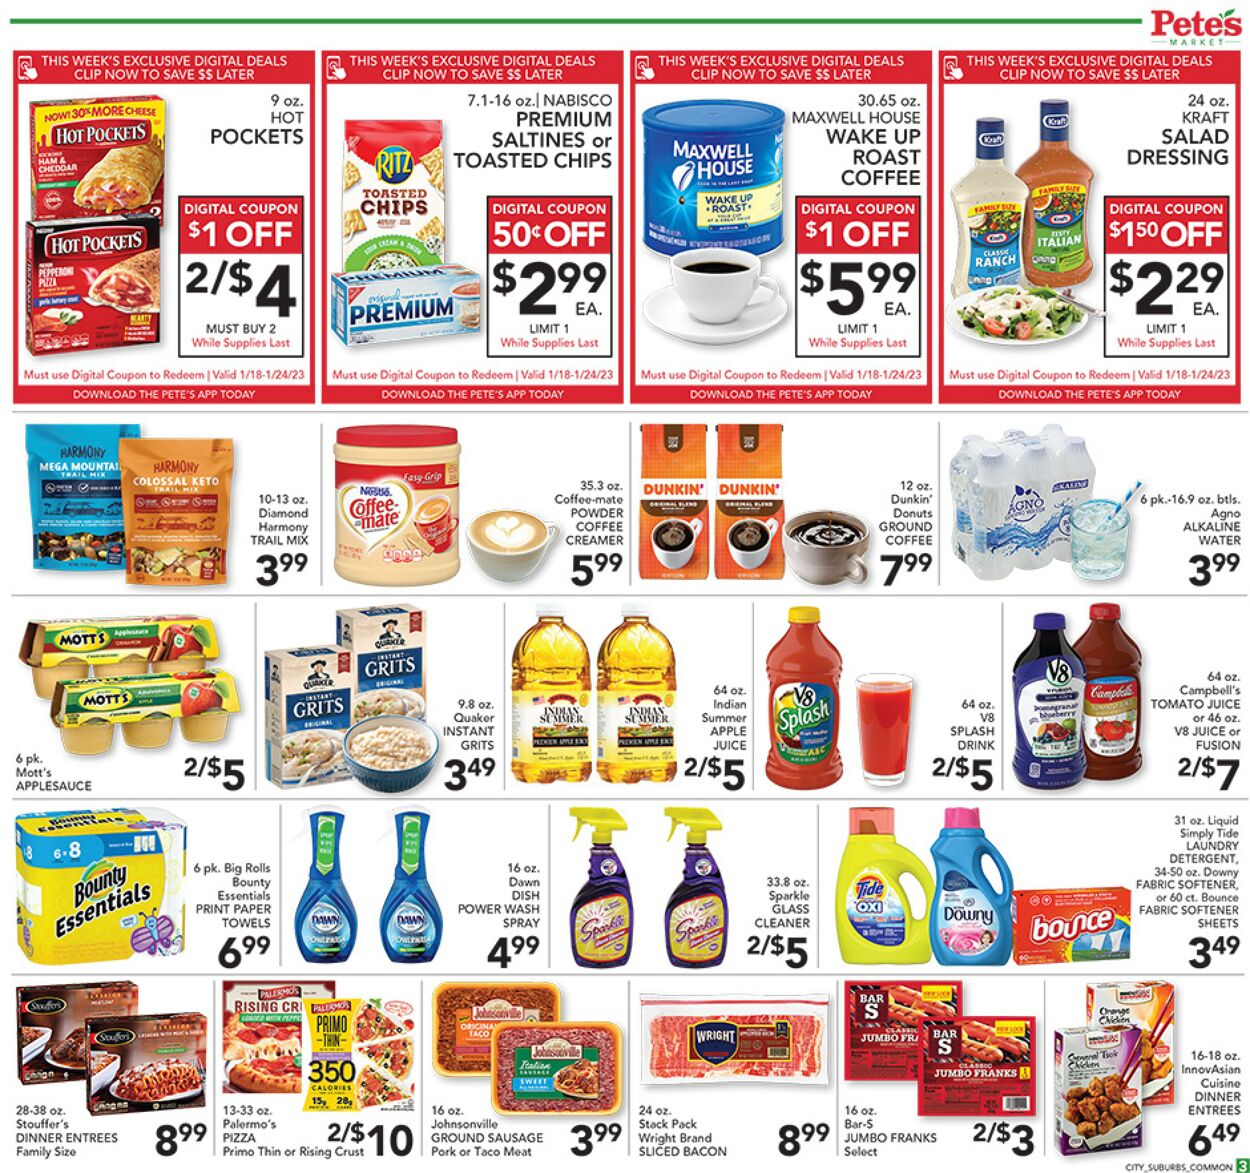 Weekly ad Pete's Fresh Market 01/18/2023 - 01/24/2023